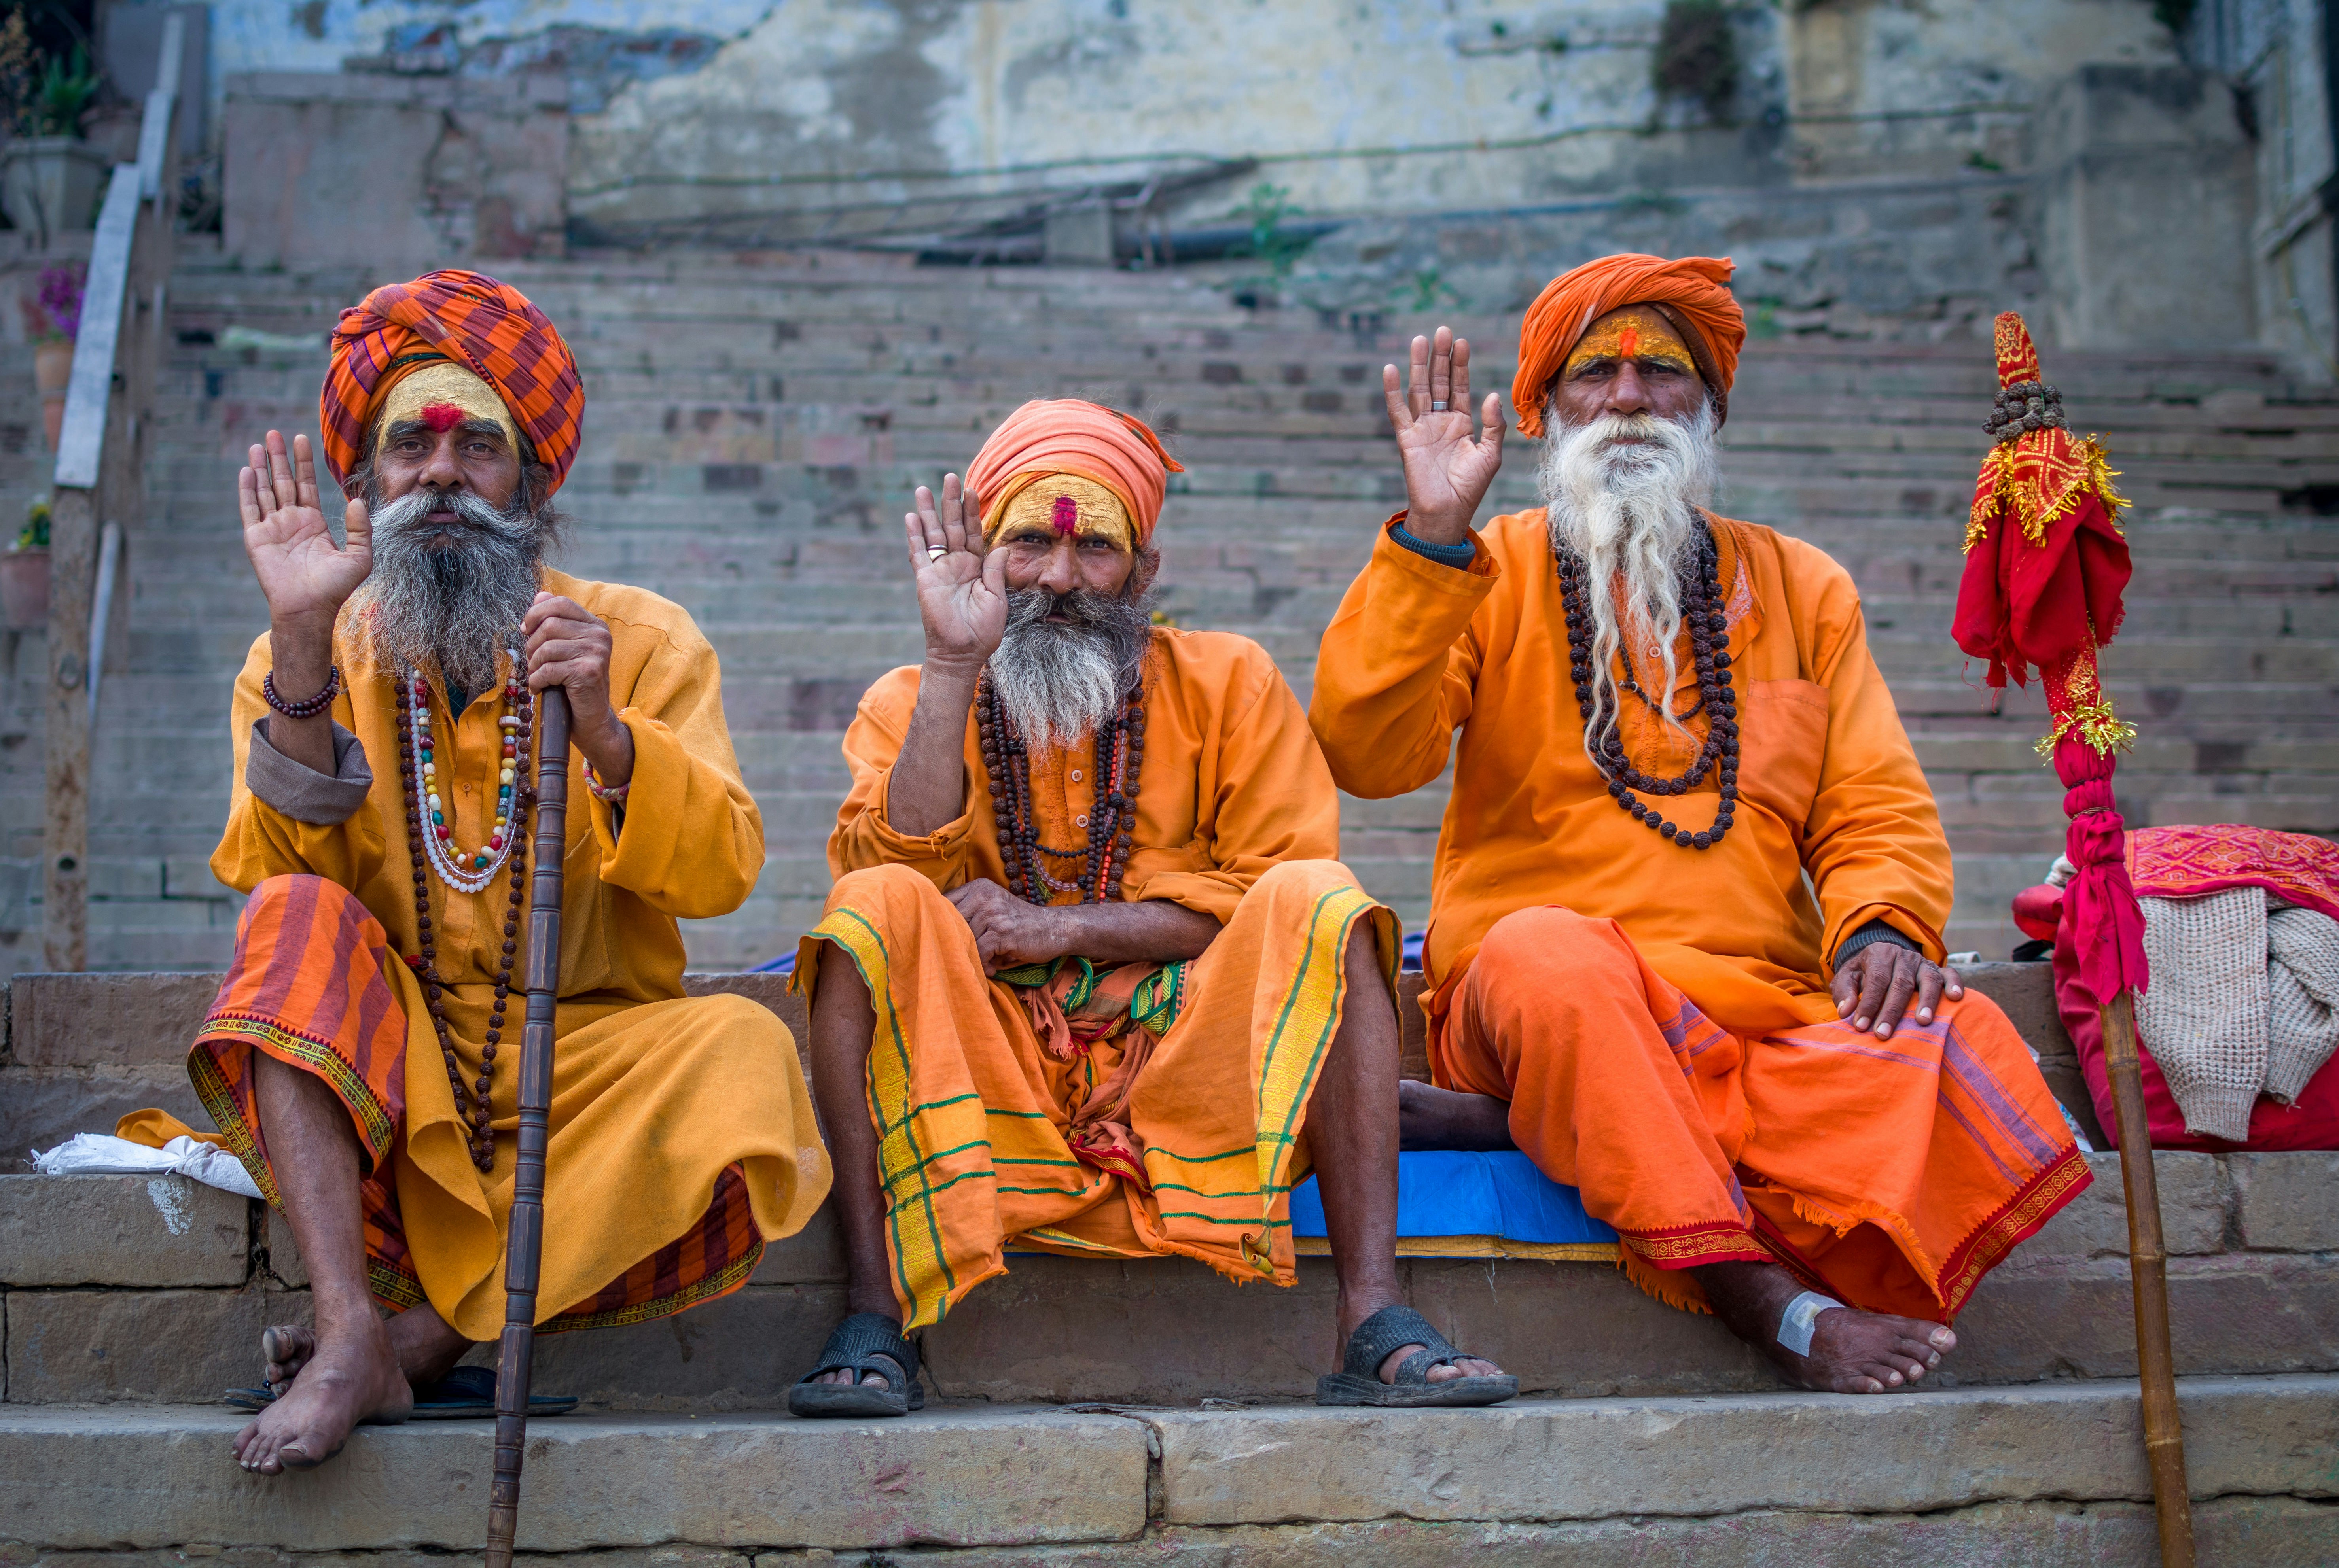 Three holy men dressed in orange robes and turbans, each holding up their right hands, sit on a set on concrete steps in Varanasi, India.